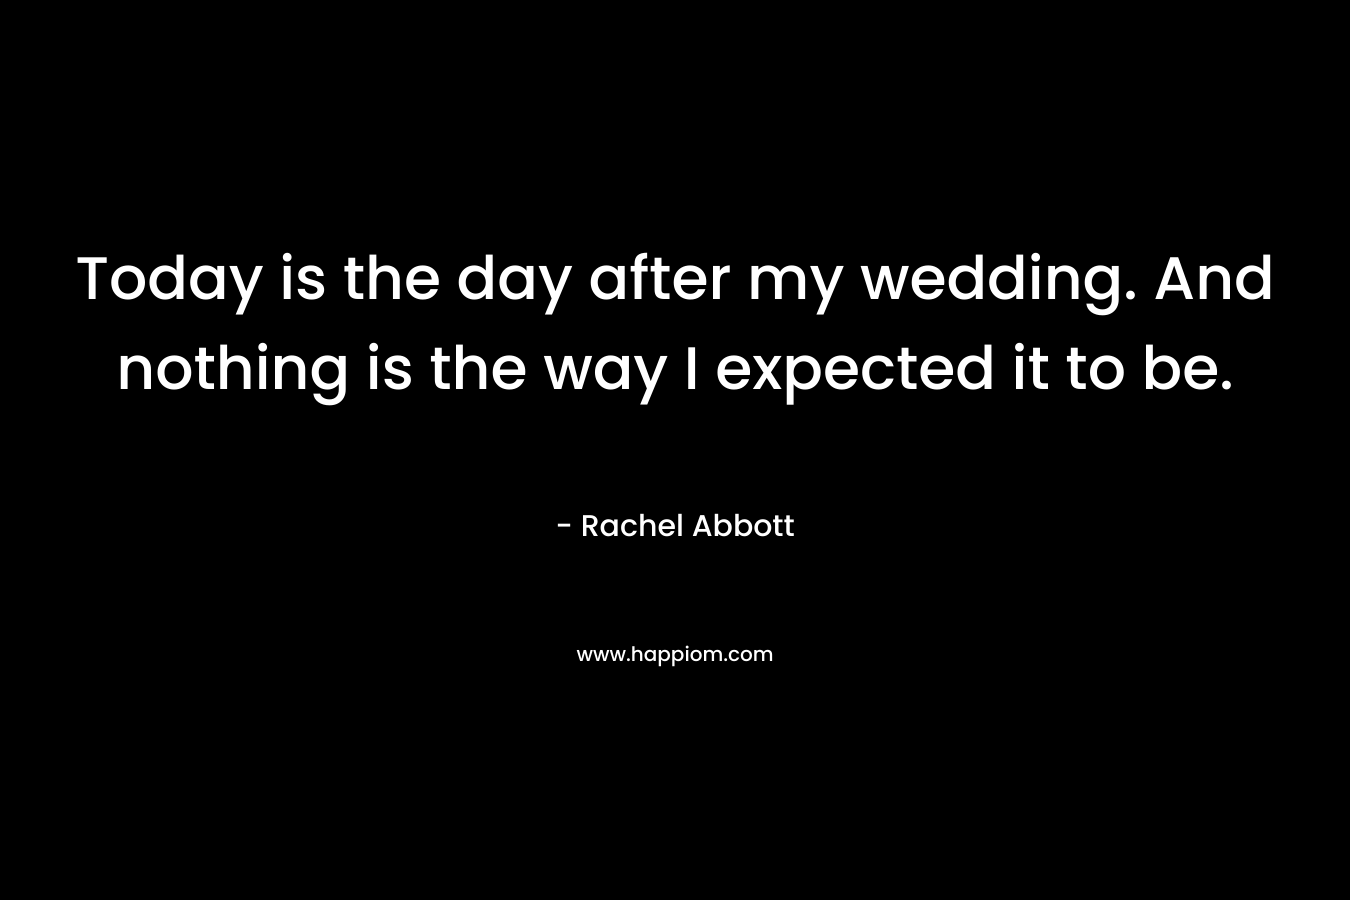 Today is the day after my wedding. And nothing is the way I expected it to be. – Rachel Abbott